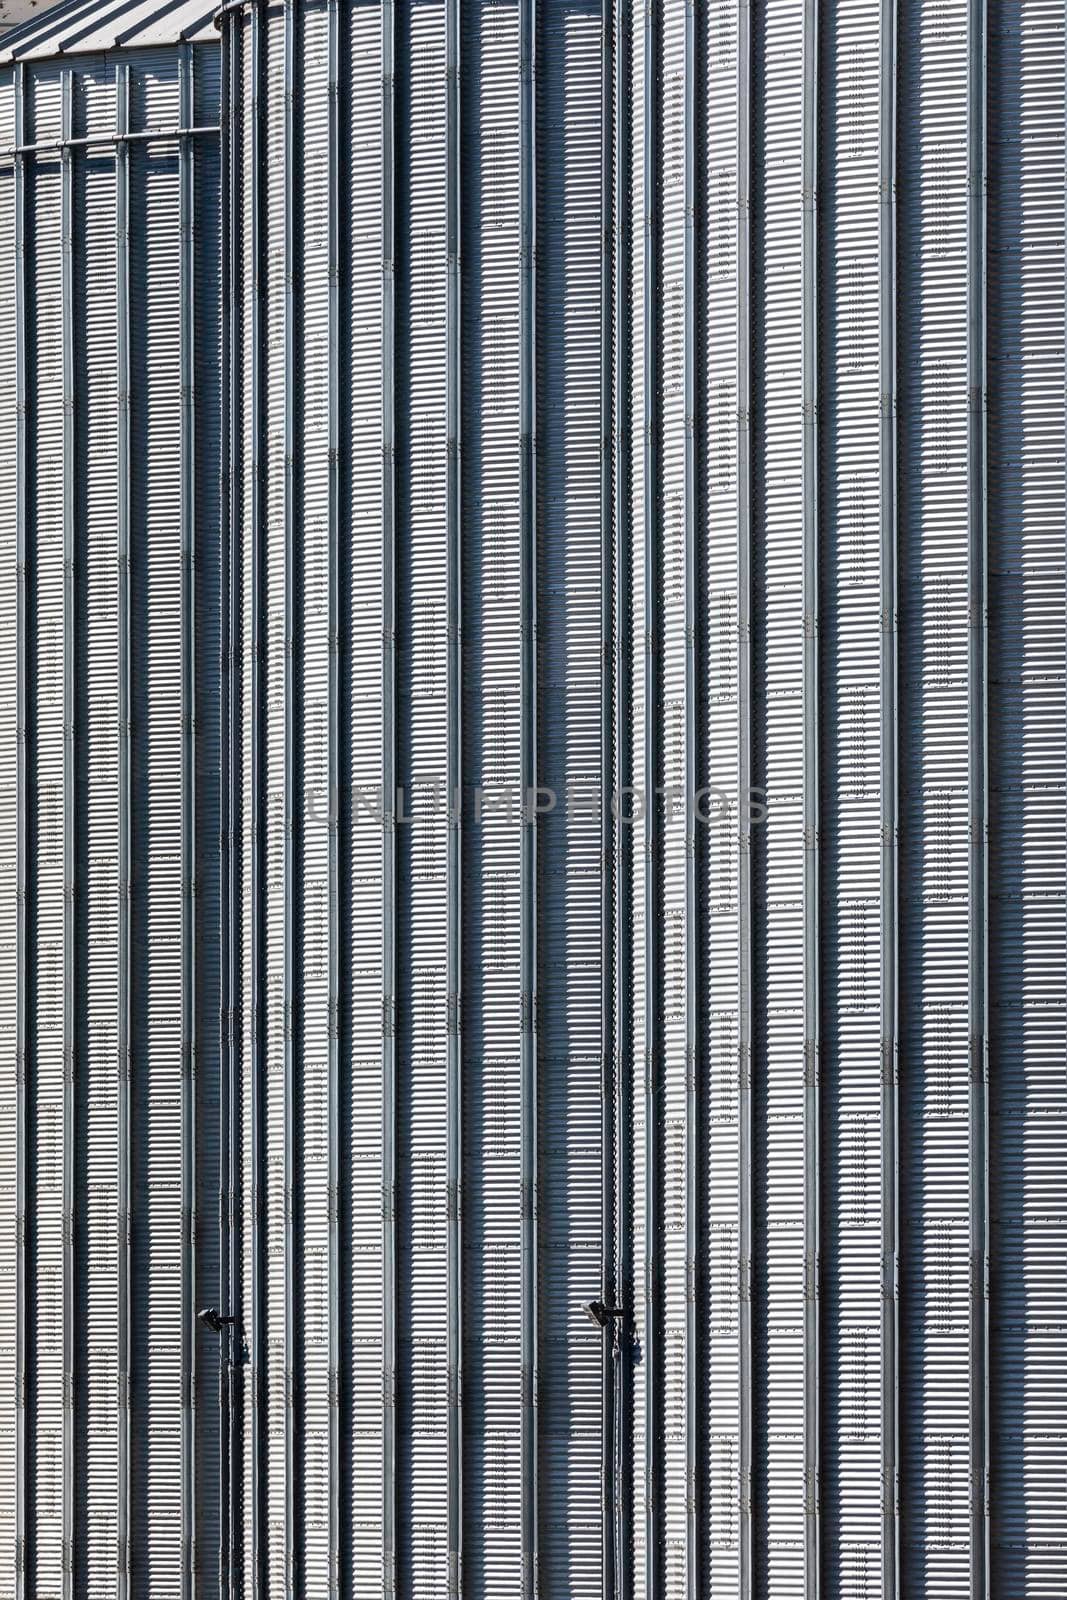 The corrugated steel sides of a storage silo at a flour mill by WittkePhotos